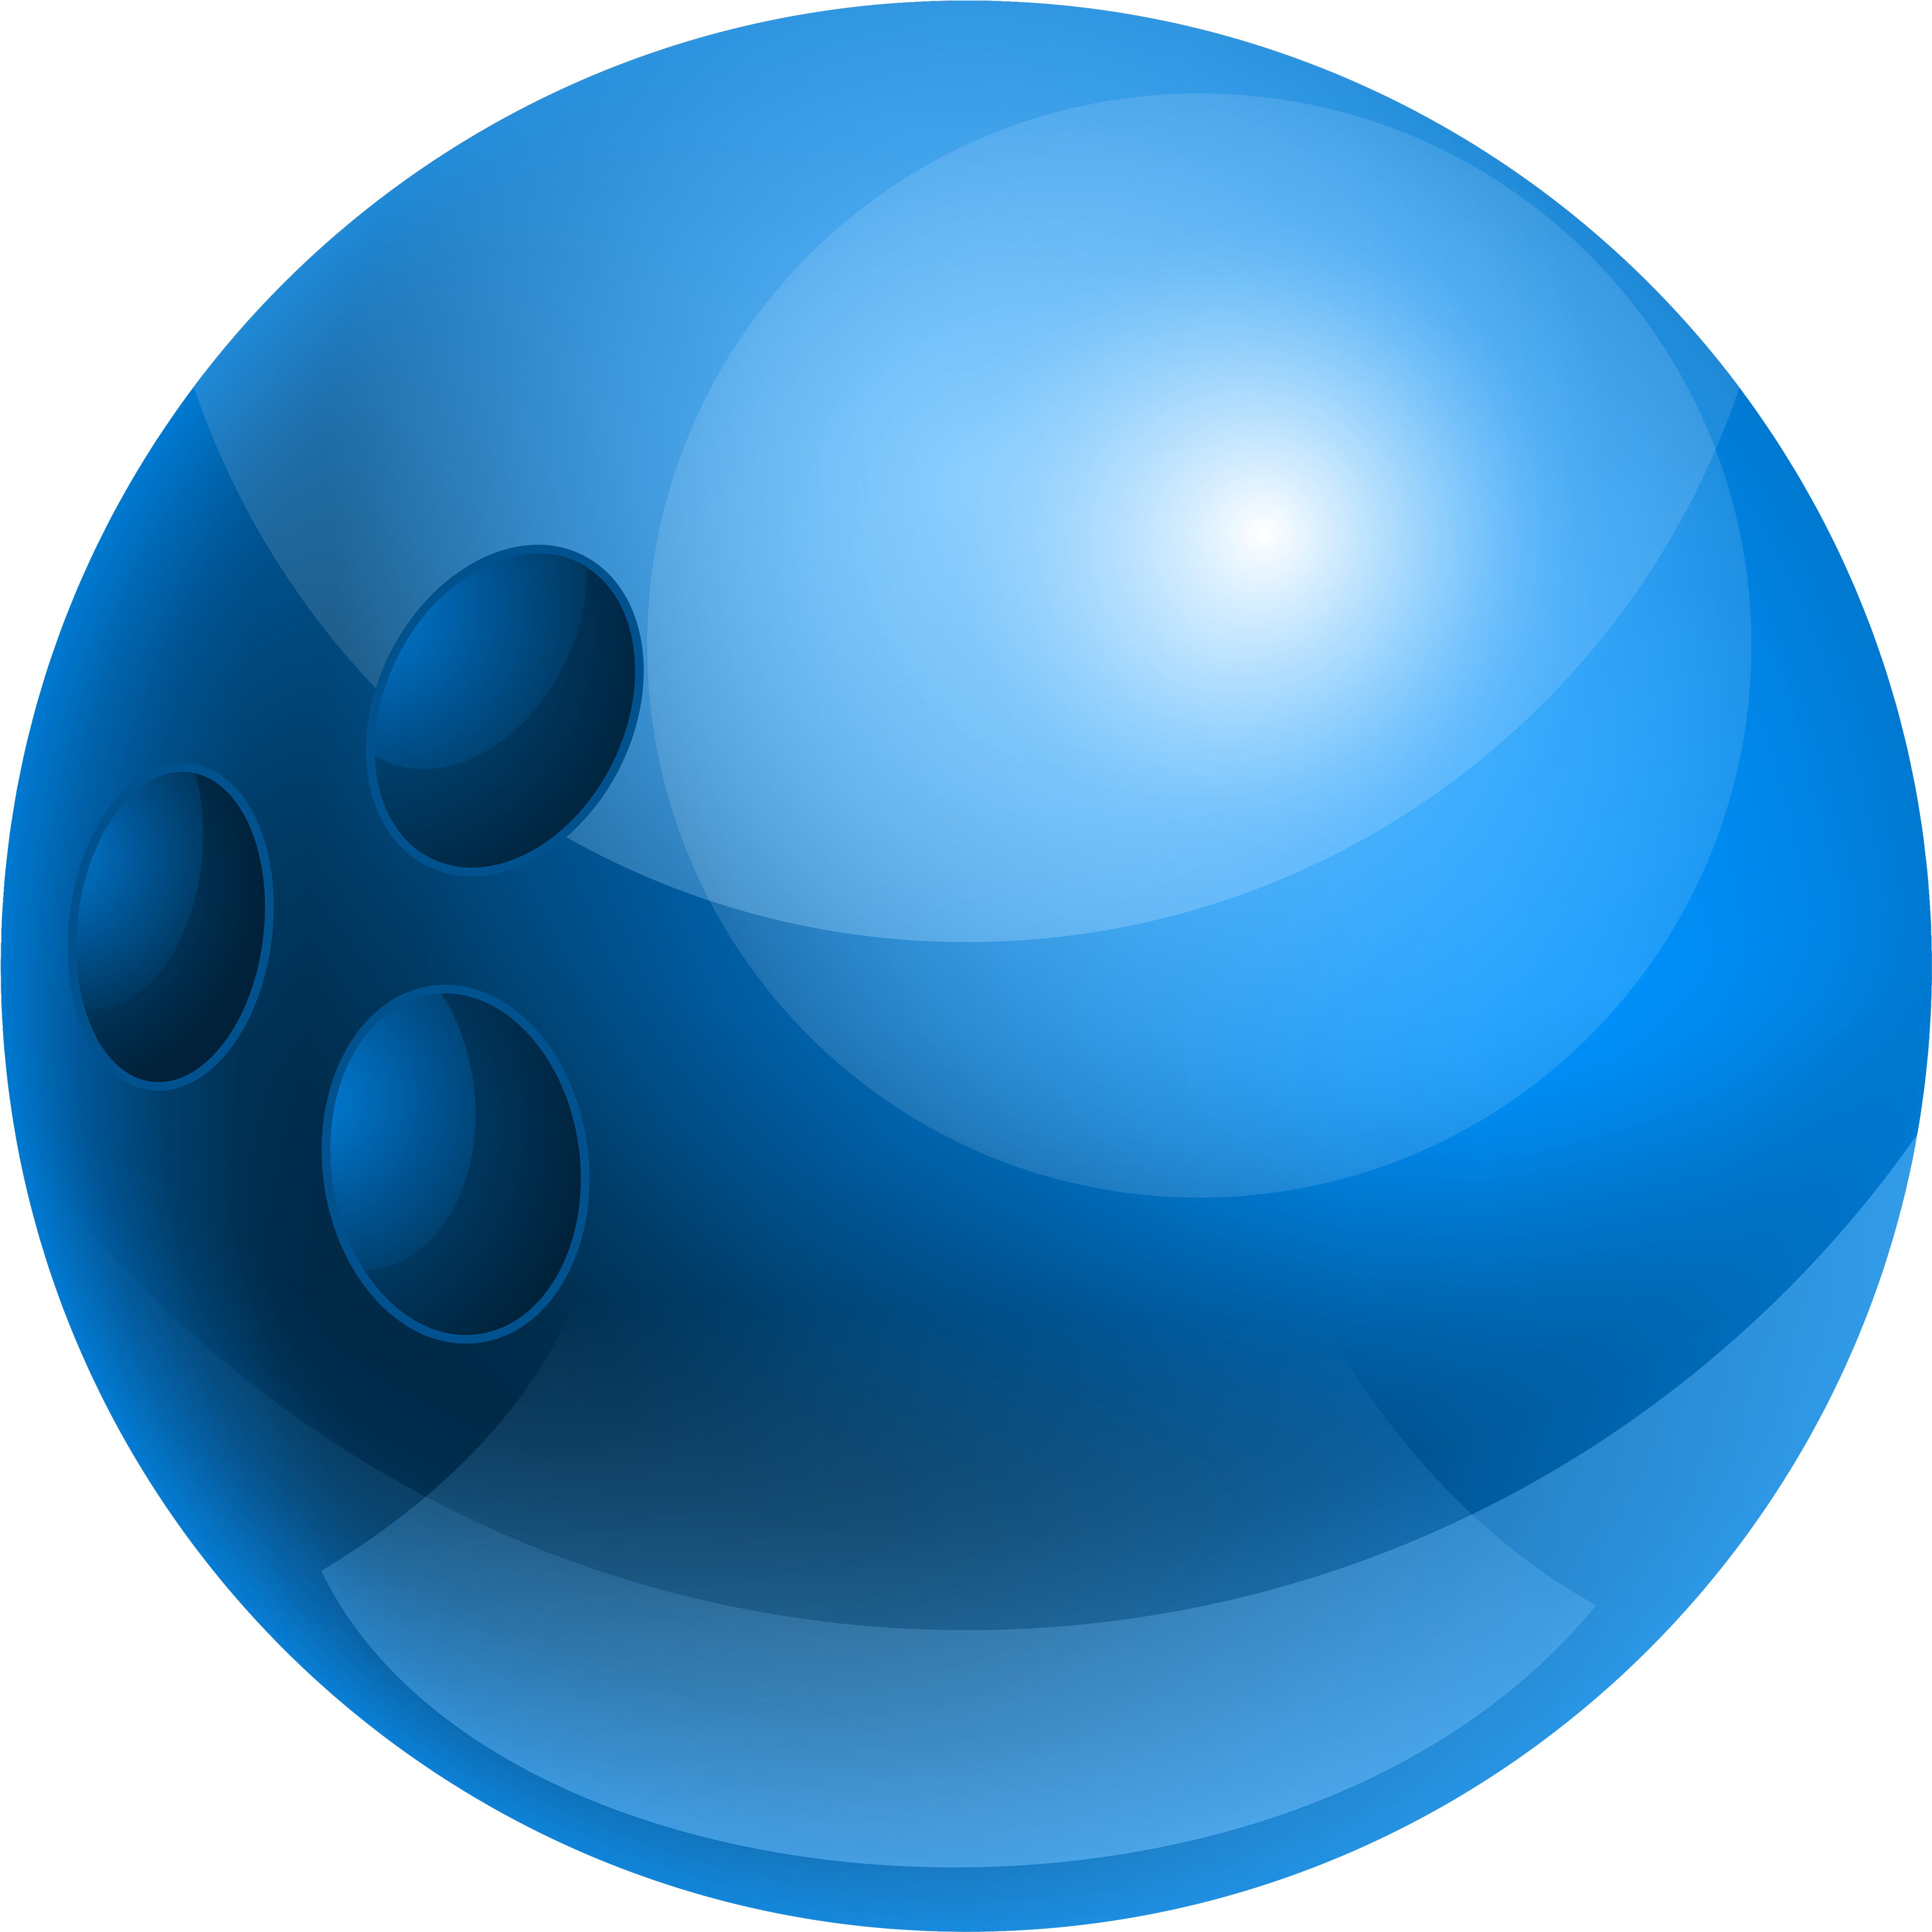 Clipart Of Sphere, 3 Ball And Blue Bag Clipart Of Pins, - Sphere (4000x4000)